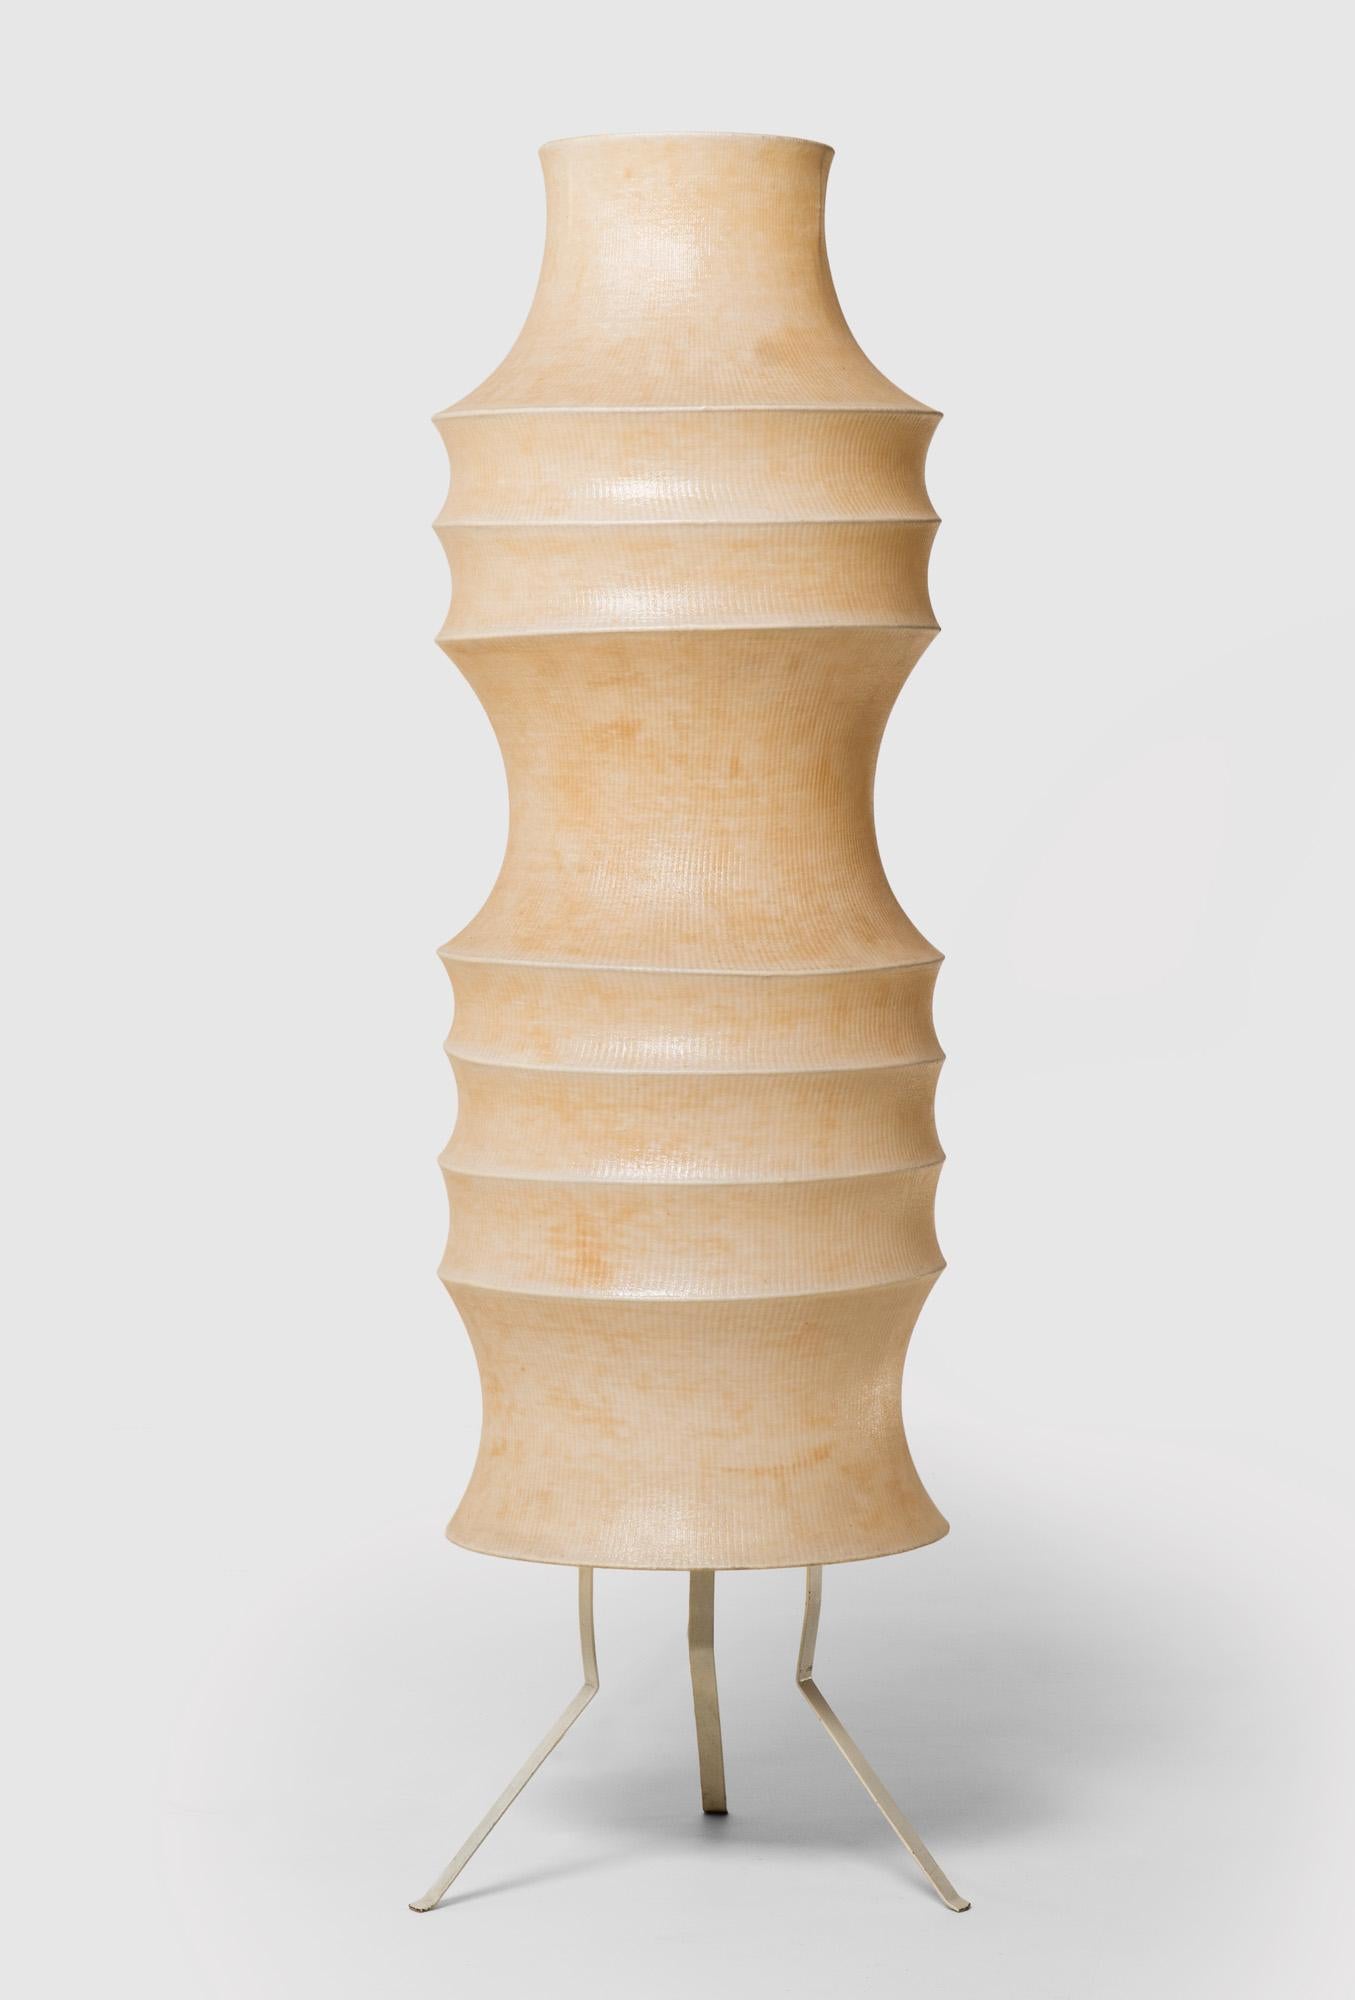 Cocoon floor lamp, Italy, 1970s. Matal wire, stretched fabric and polyester resin.